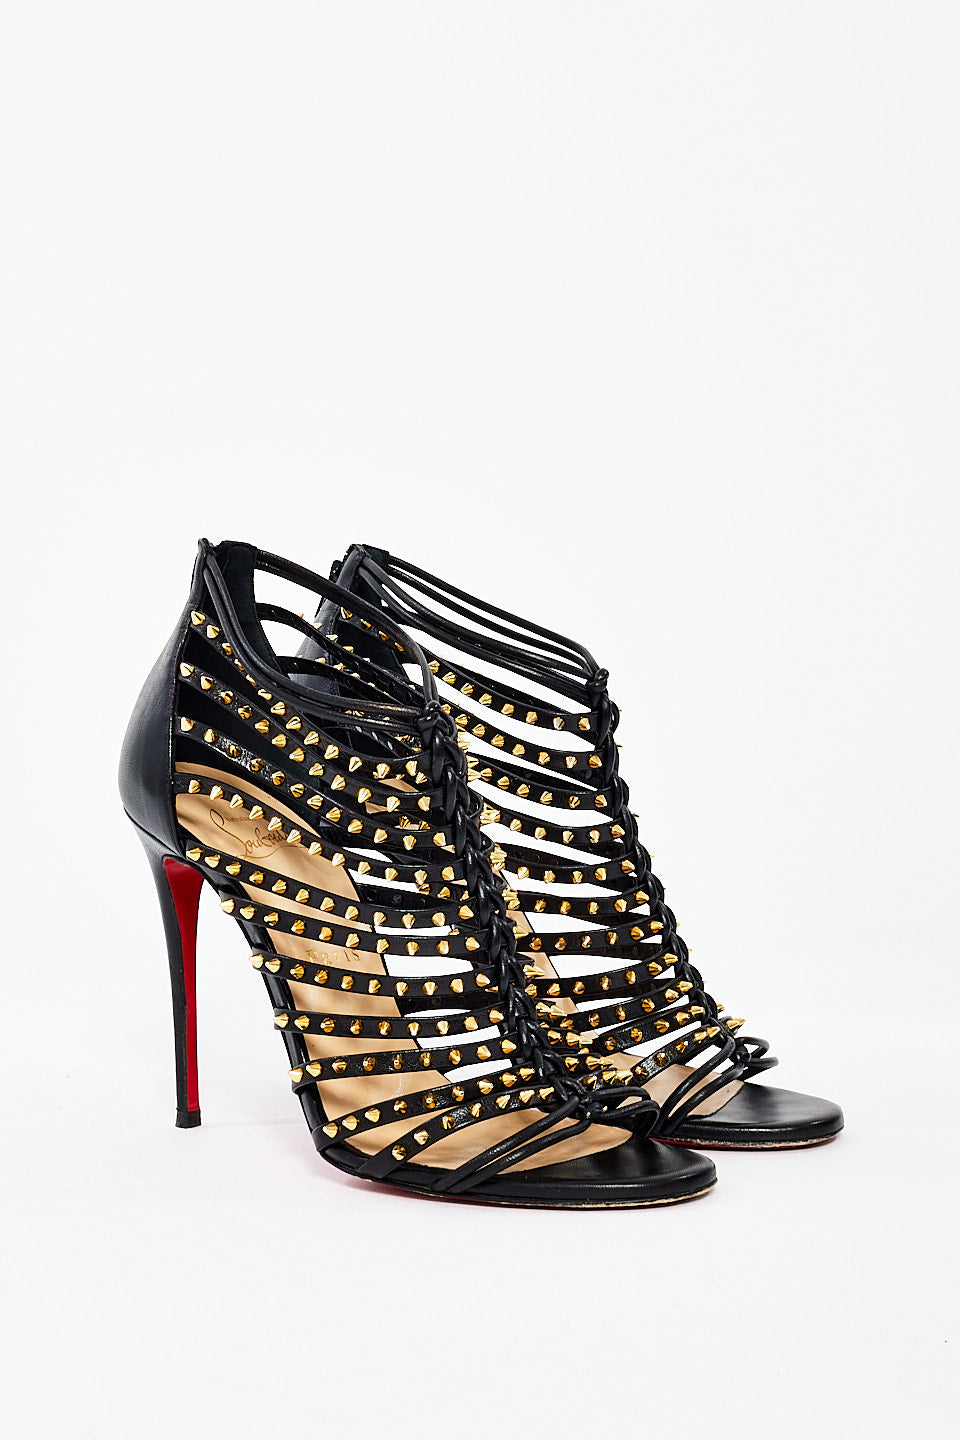 Christian Louboutin Black Studded Leather Millaclou 100mm Cage Sandals - 37